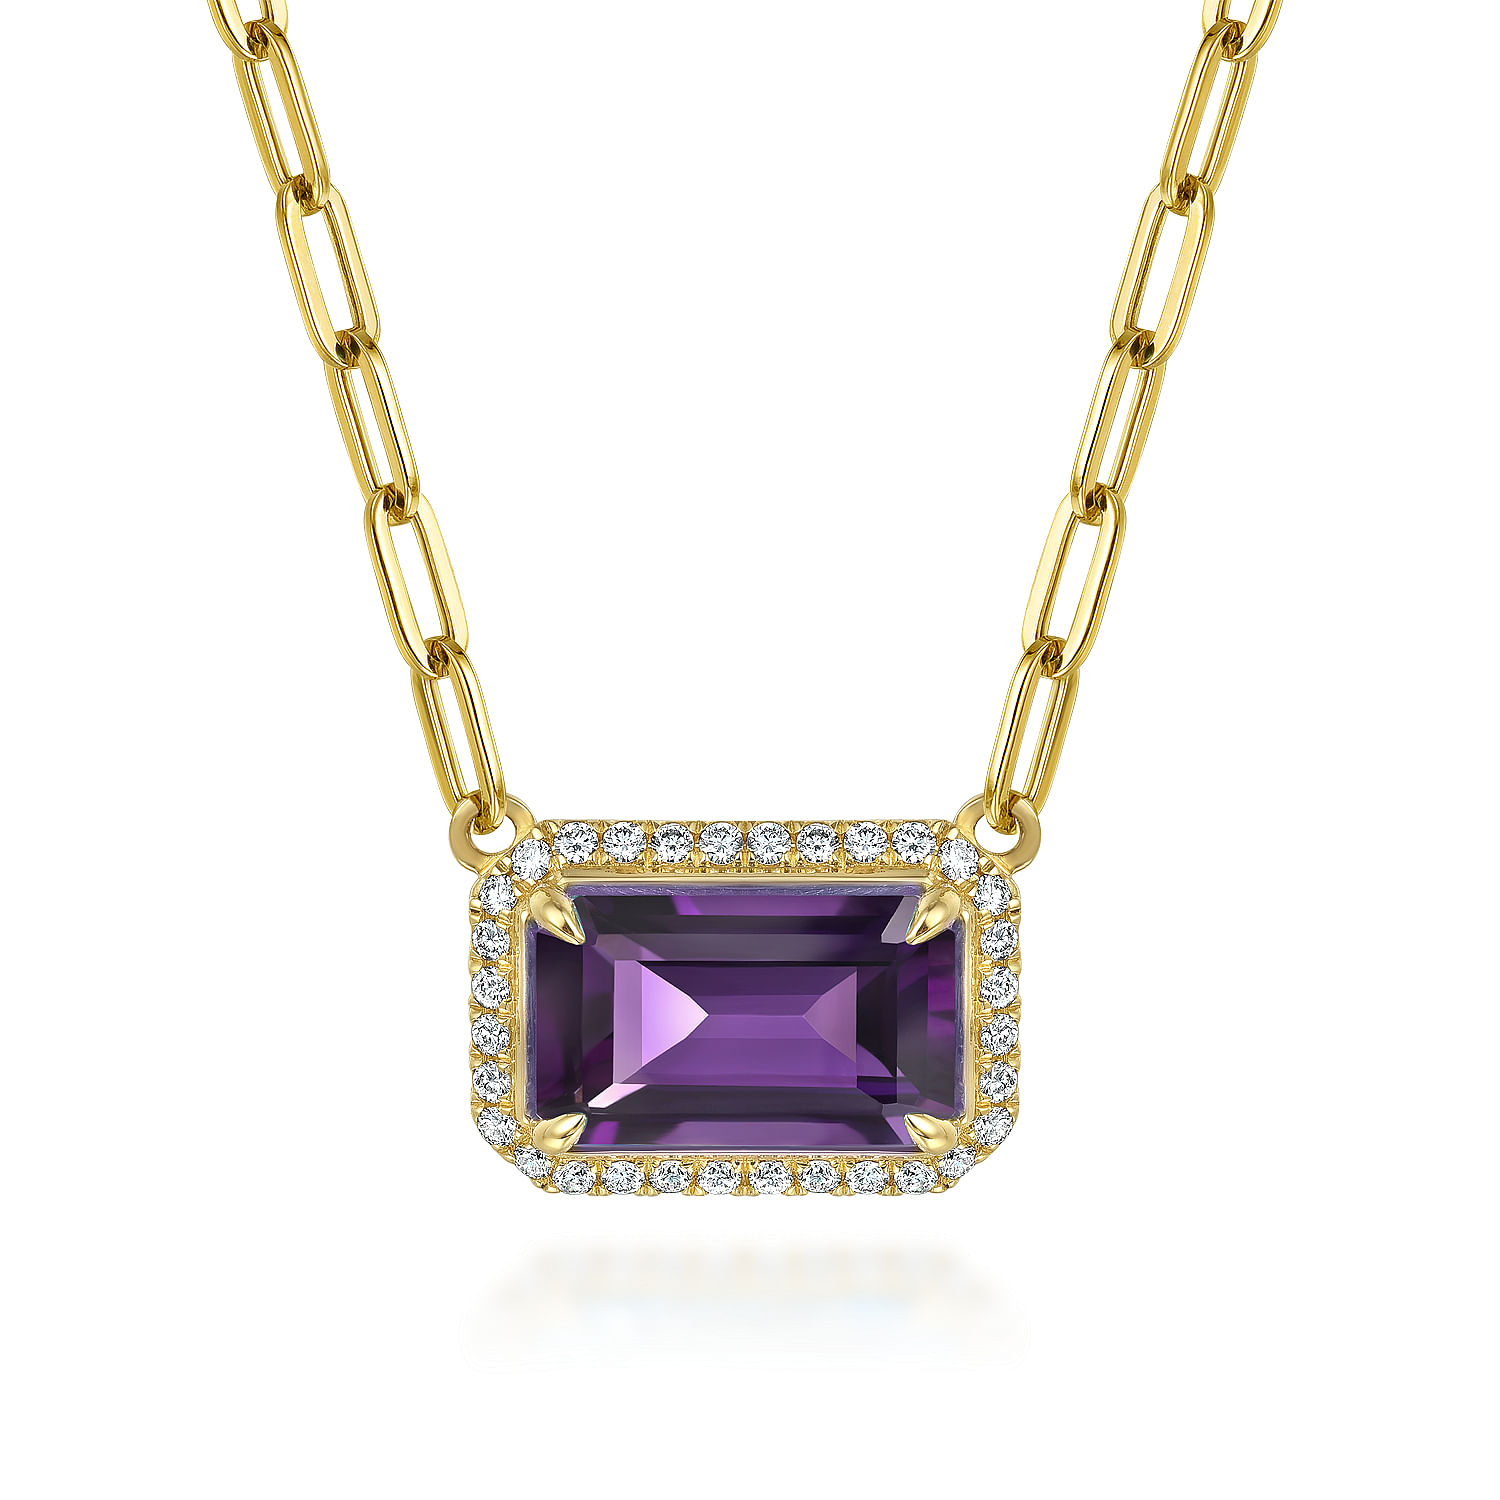 14K Yellow Gold Diamond and Amethyst Emerald Cut Necklace With Flower Pattern Gallery